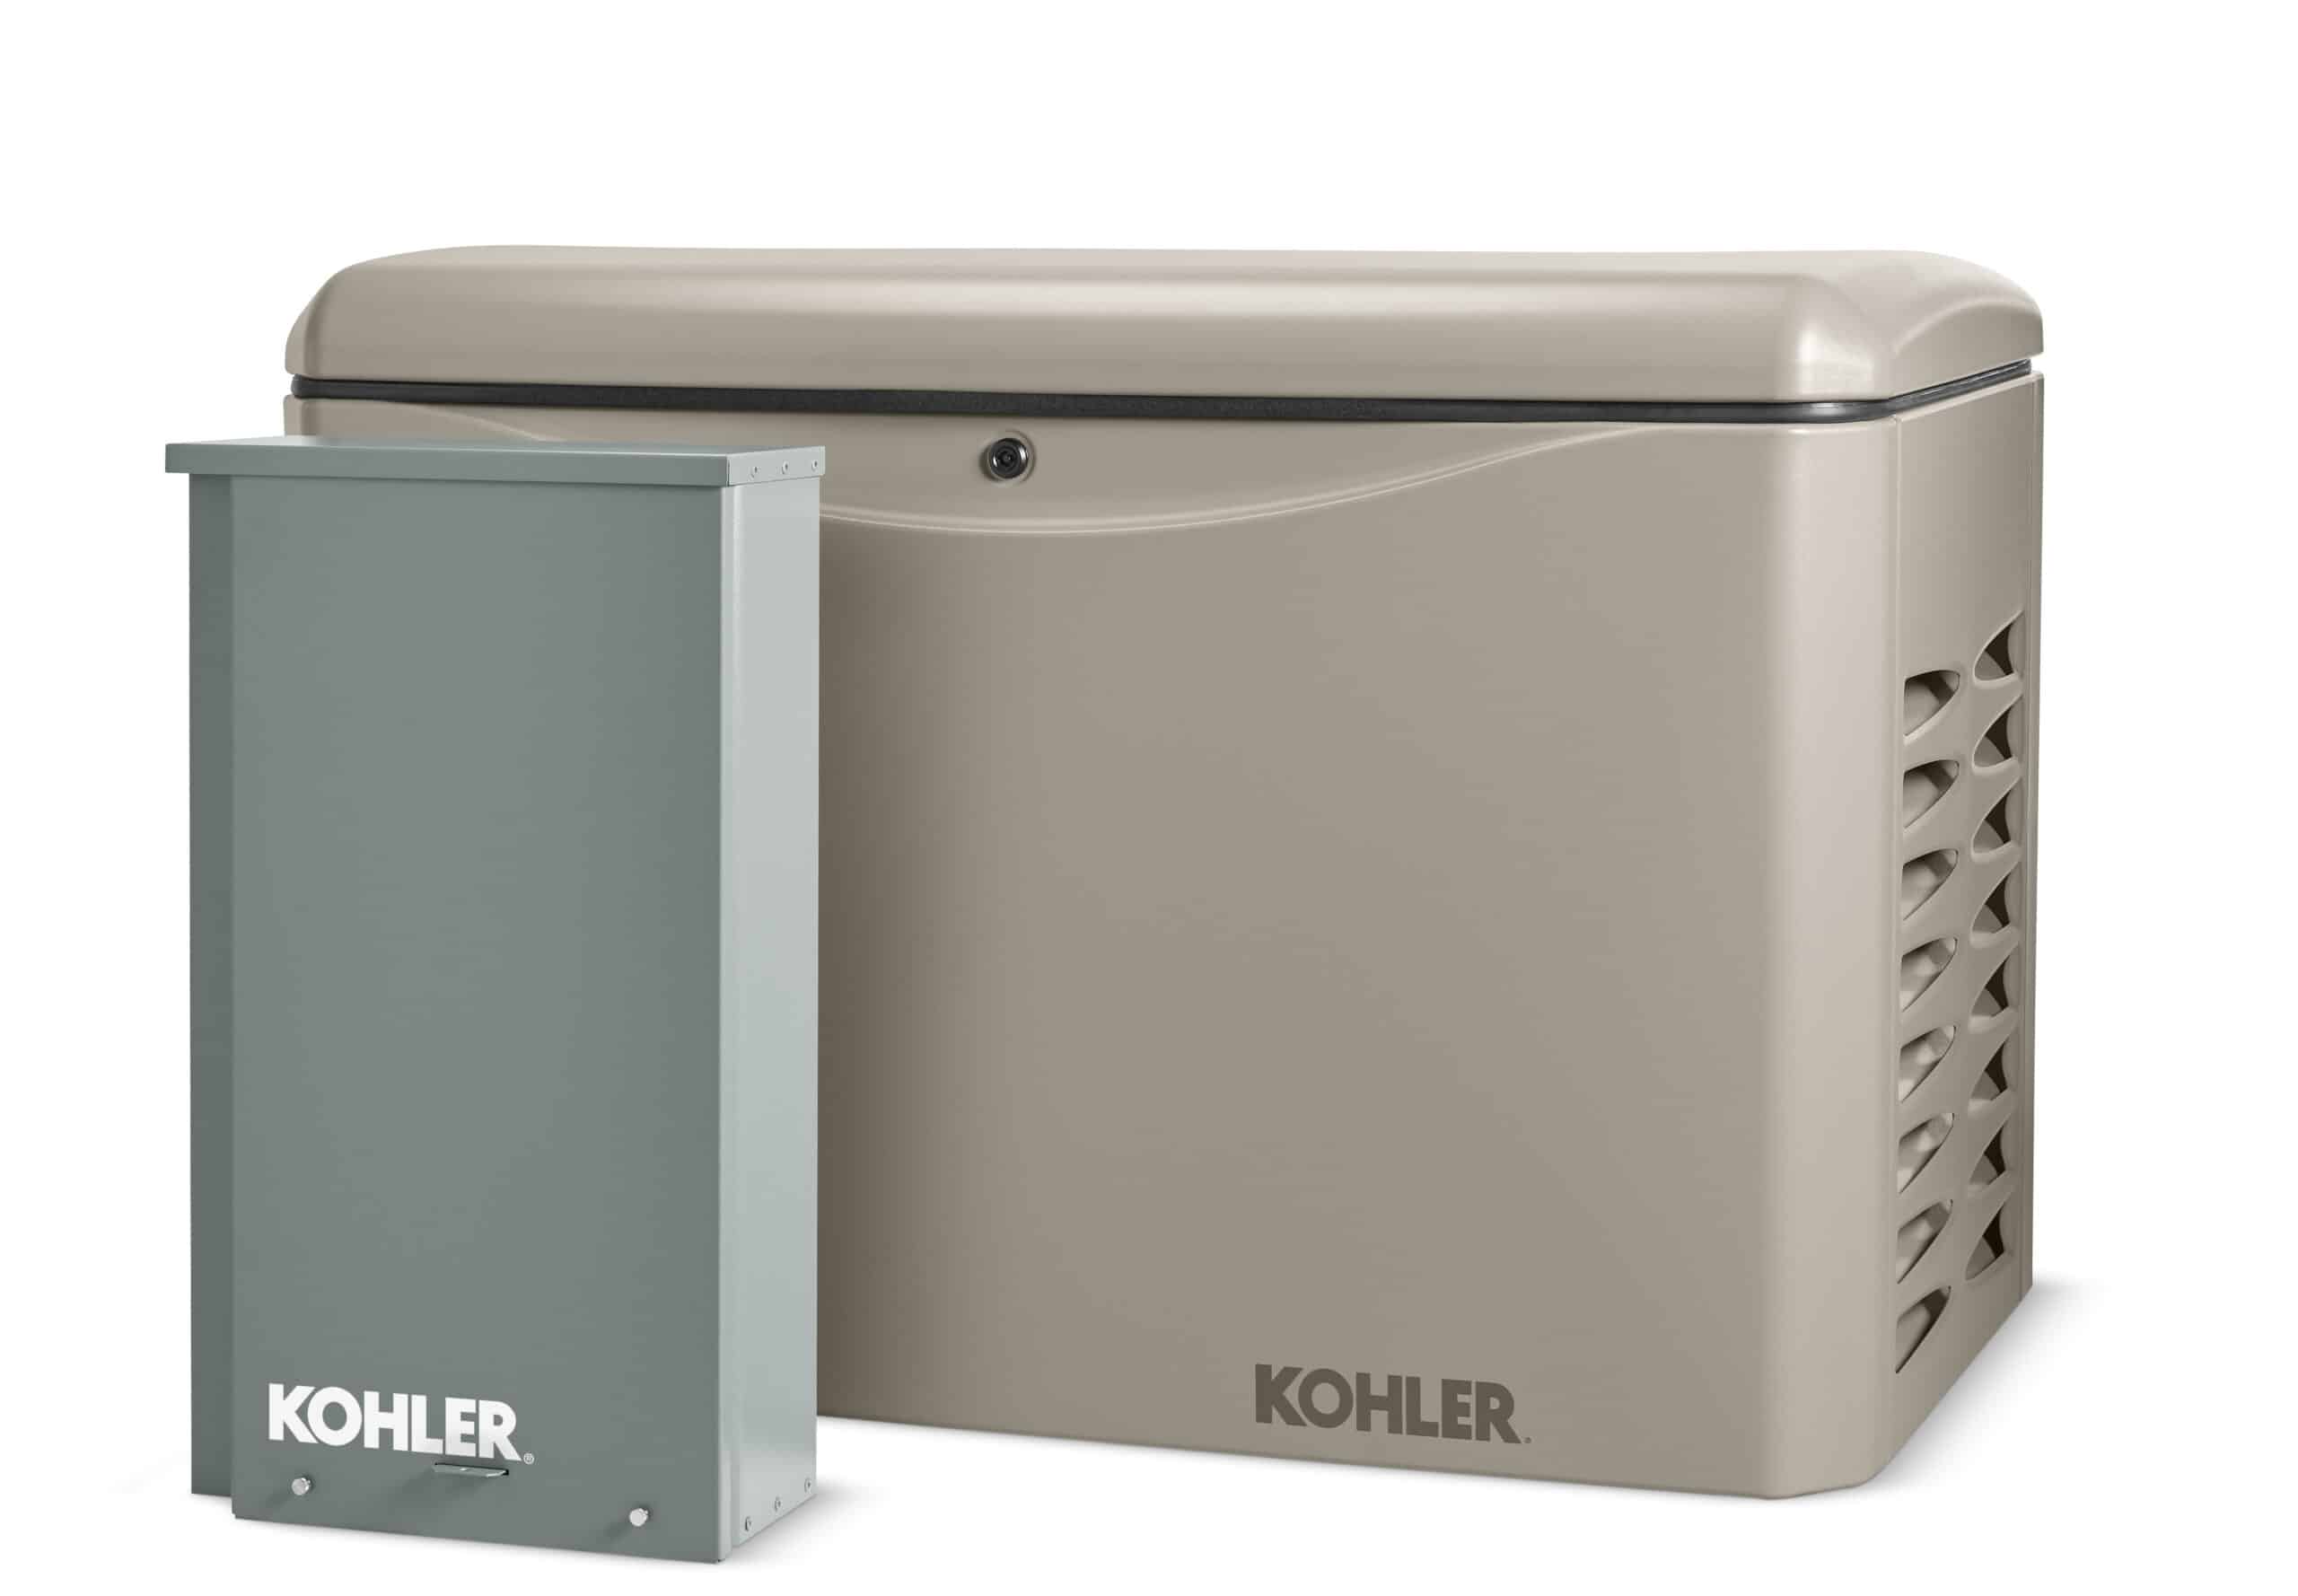 Kohler web page pic scaled - Home - FatBoy Electric